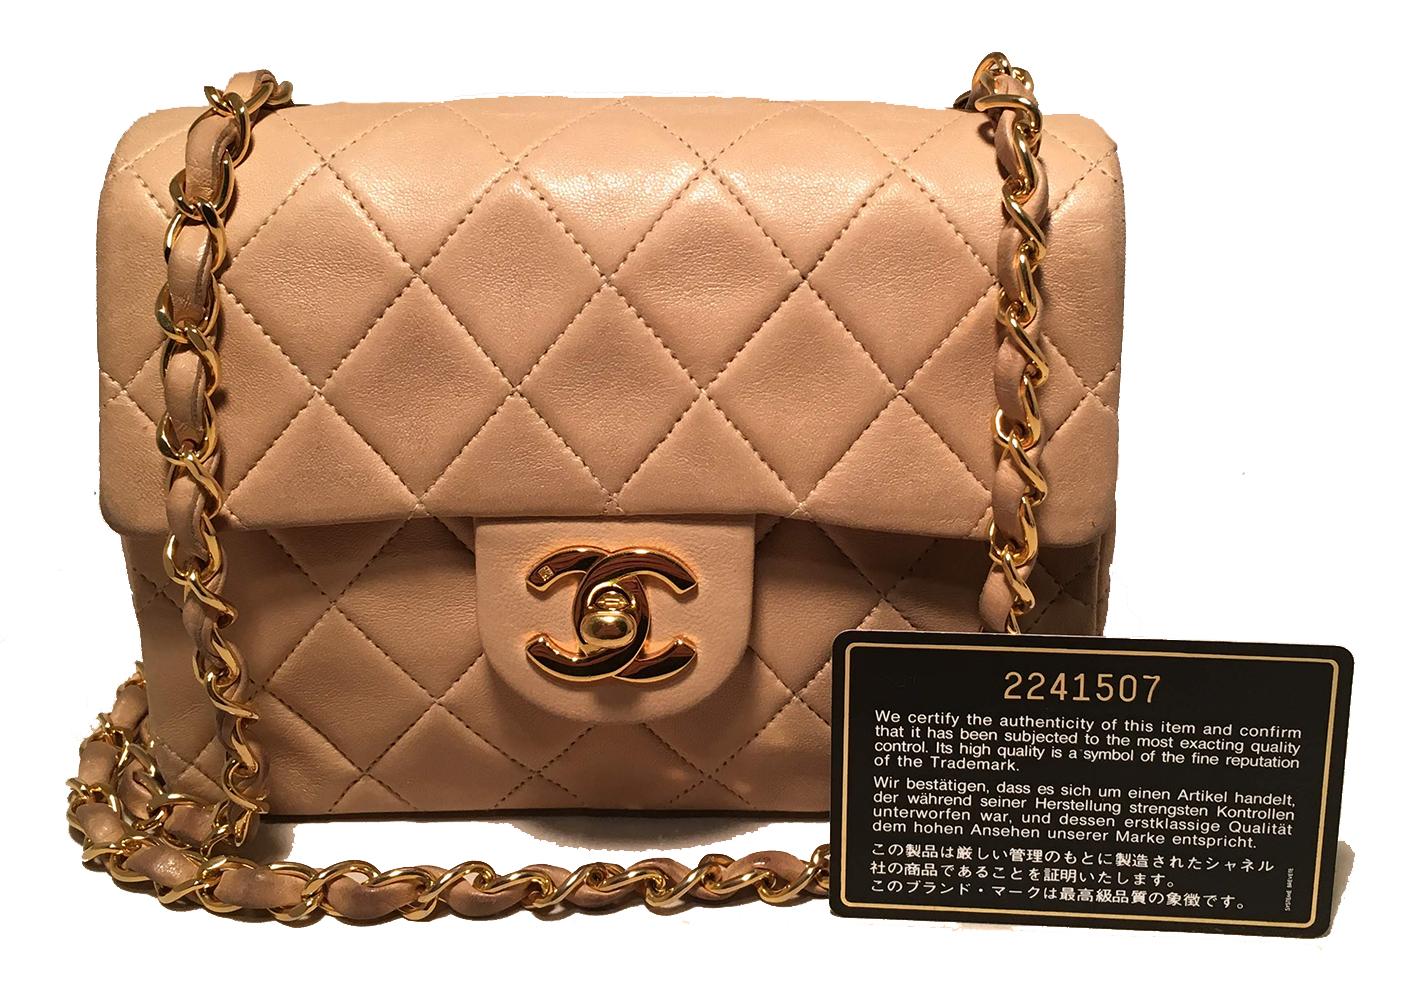 Chanel Nude Quilted Leather Mini Classic Flap Shoulder Bag in good condition. Quilted tan lambskin leather exterior trimmed with gold hardware. Signature twisting CC logo front closure opens to a tan leather lined interior that holds 1 slit and 1